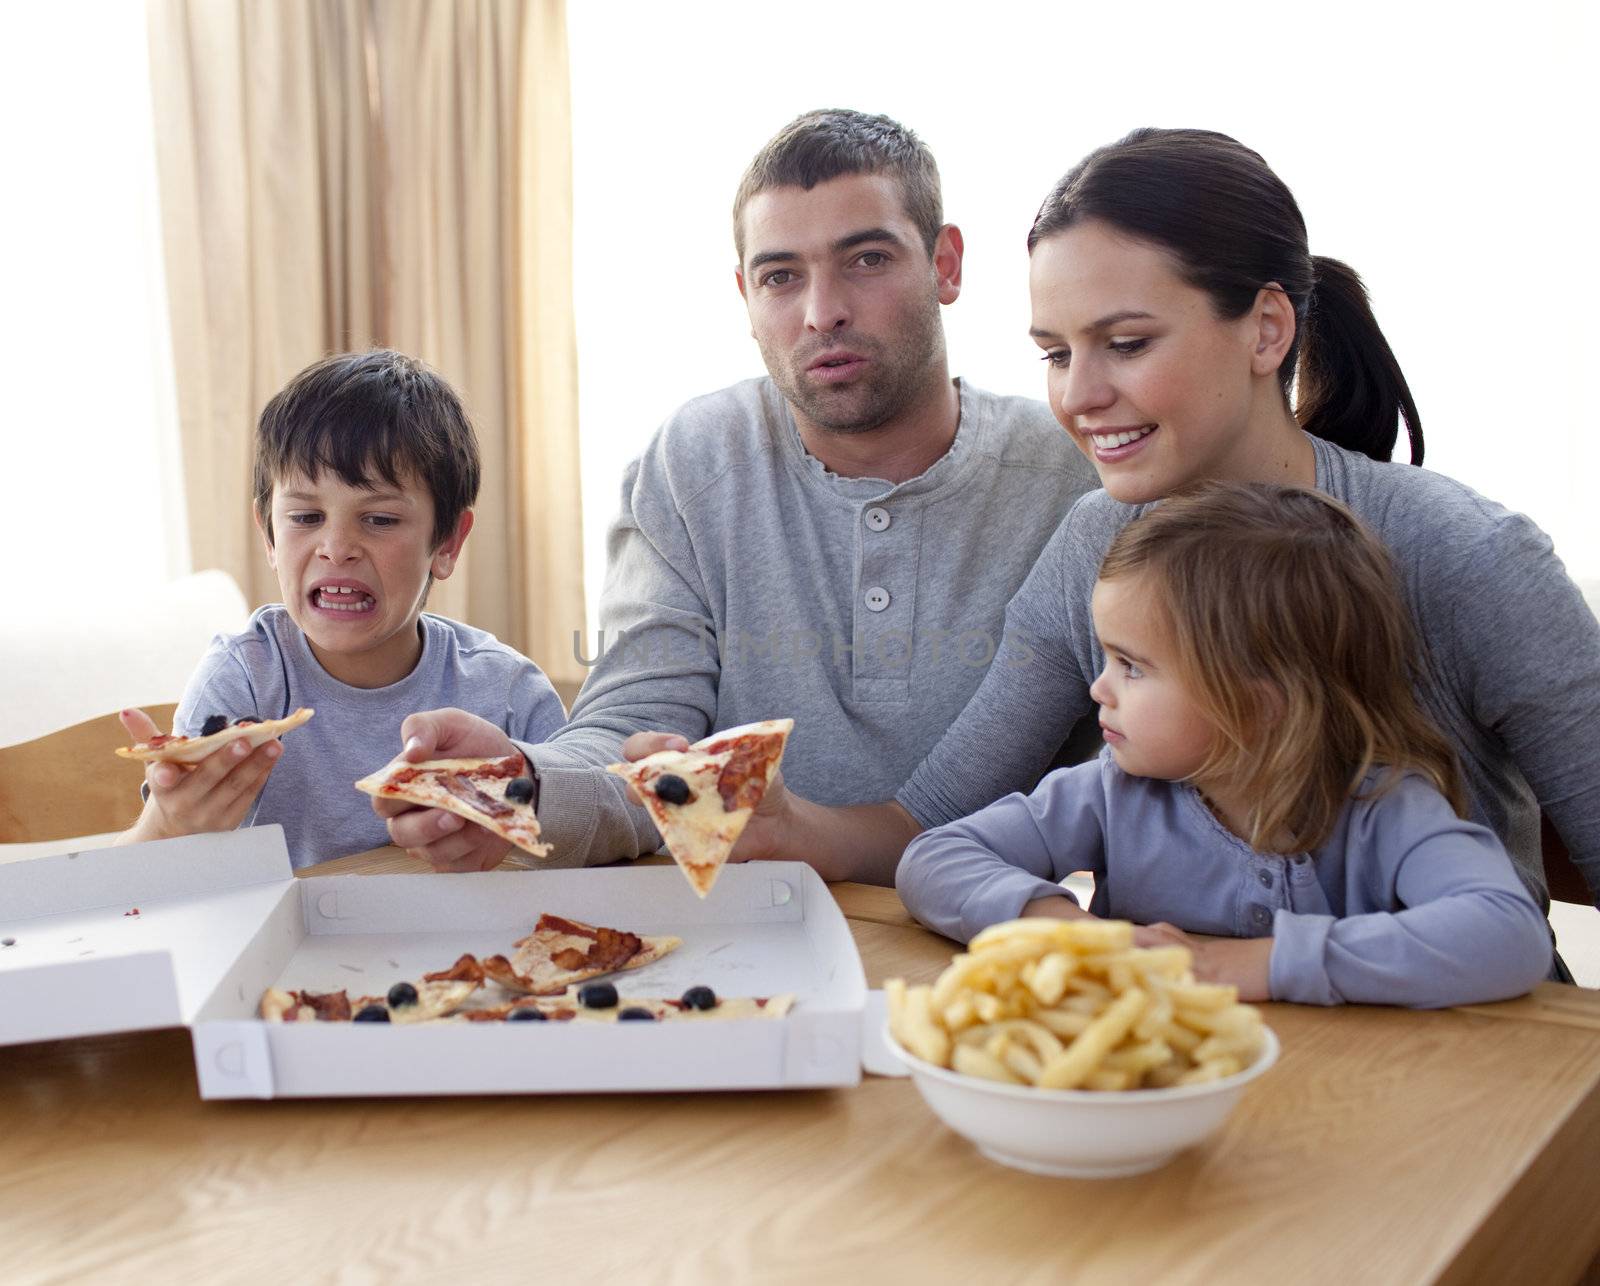 Parents and children eating pizza and fries on a sofa